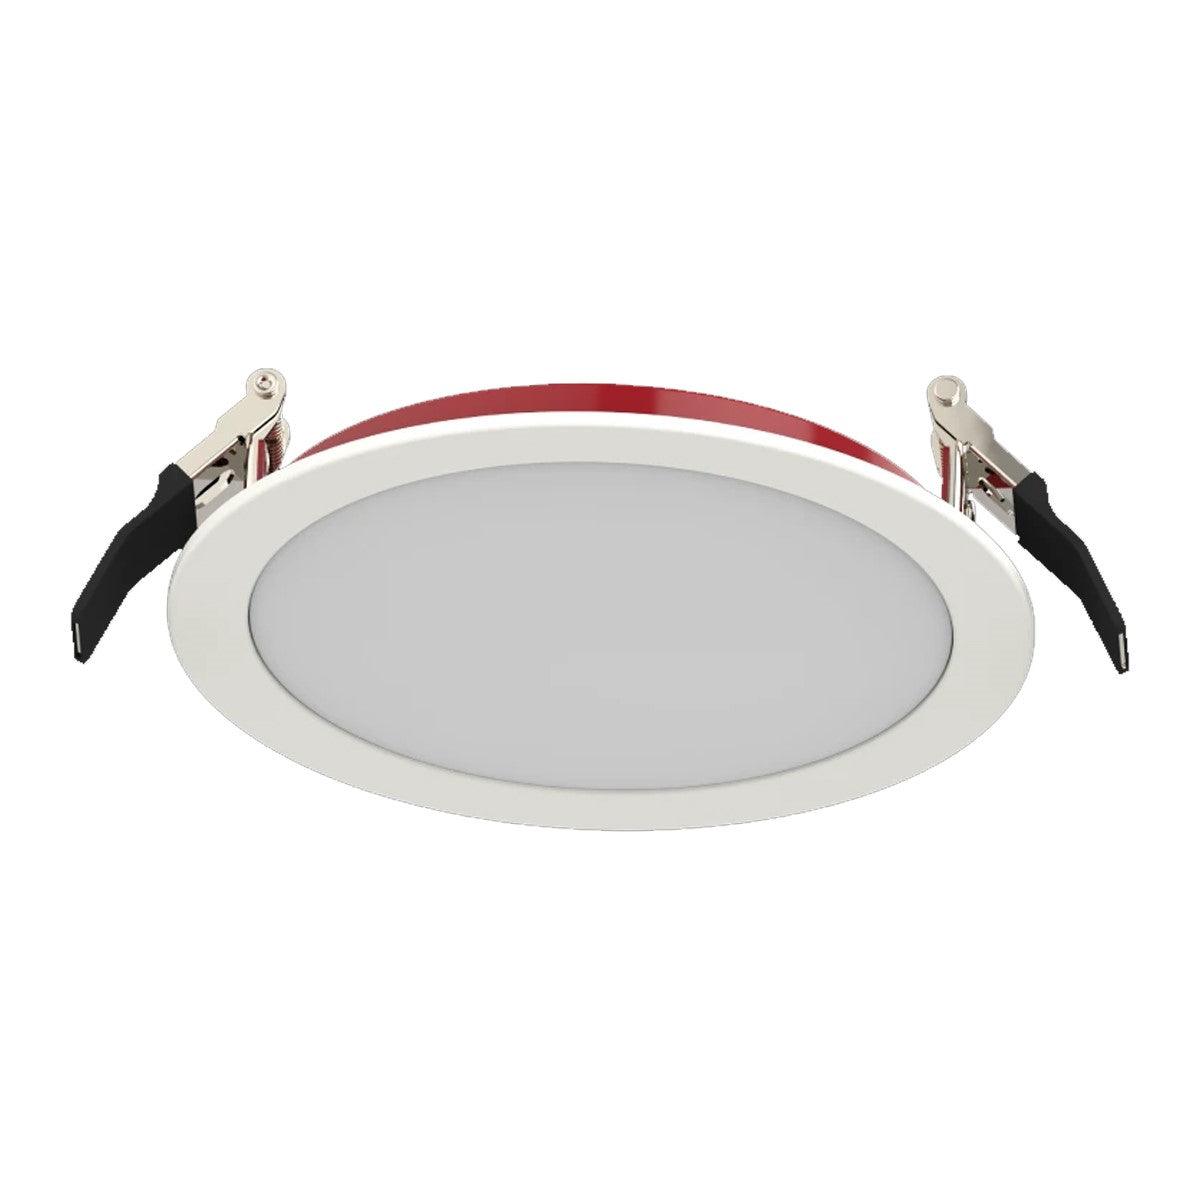 6 In. Edge-Lit Fire Resistant Wafer Canless LED Downlight, 15 Watt, 1400 Lumens, Selectable CCT, 2700K to 5000K, Smooth Trim